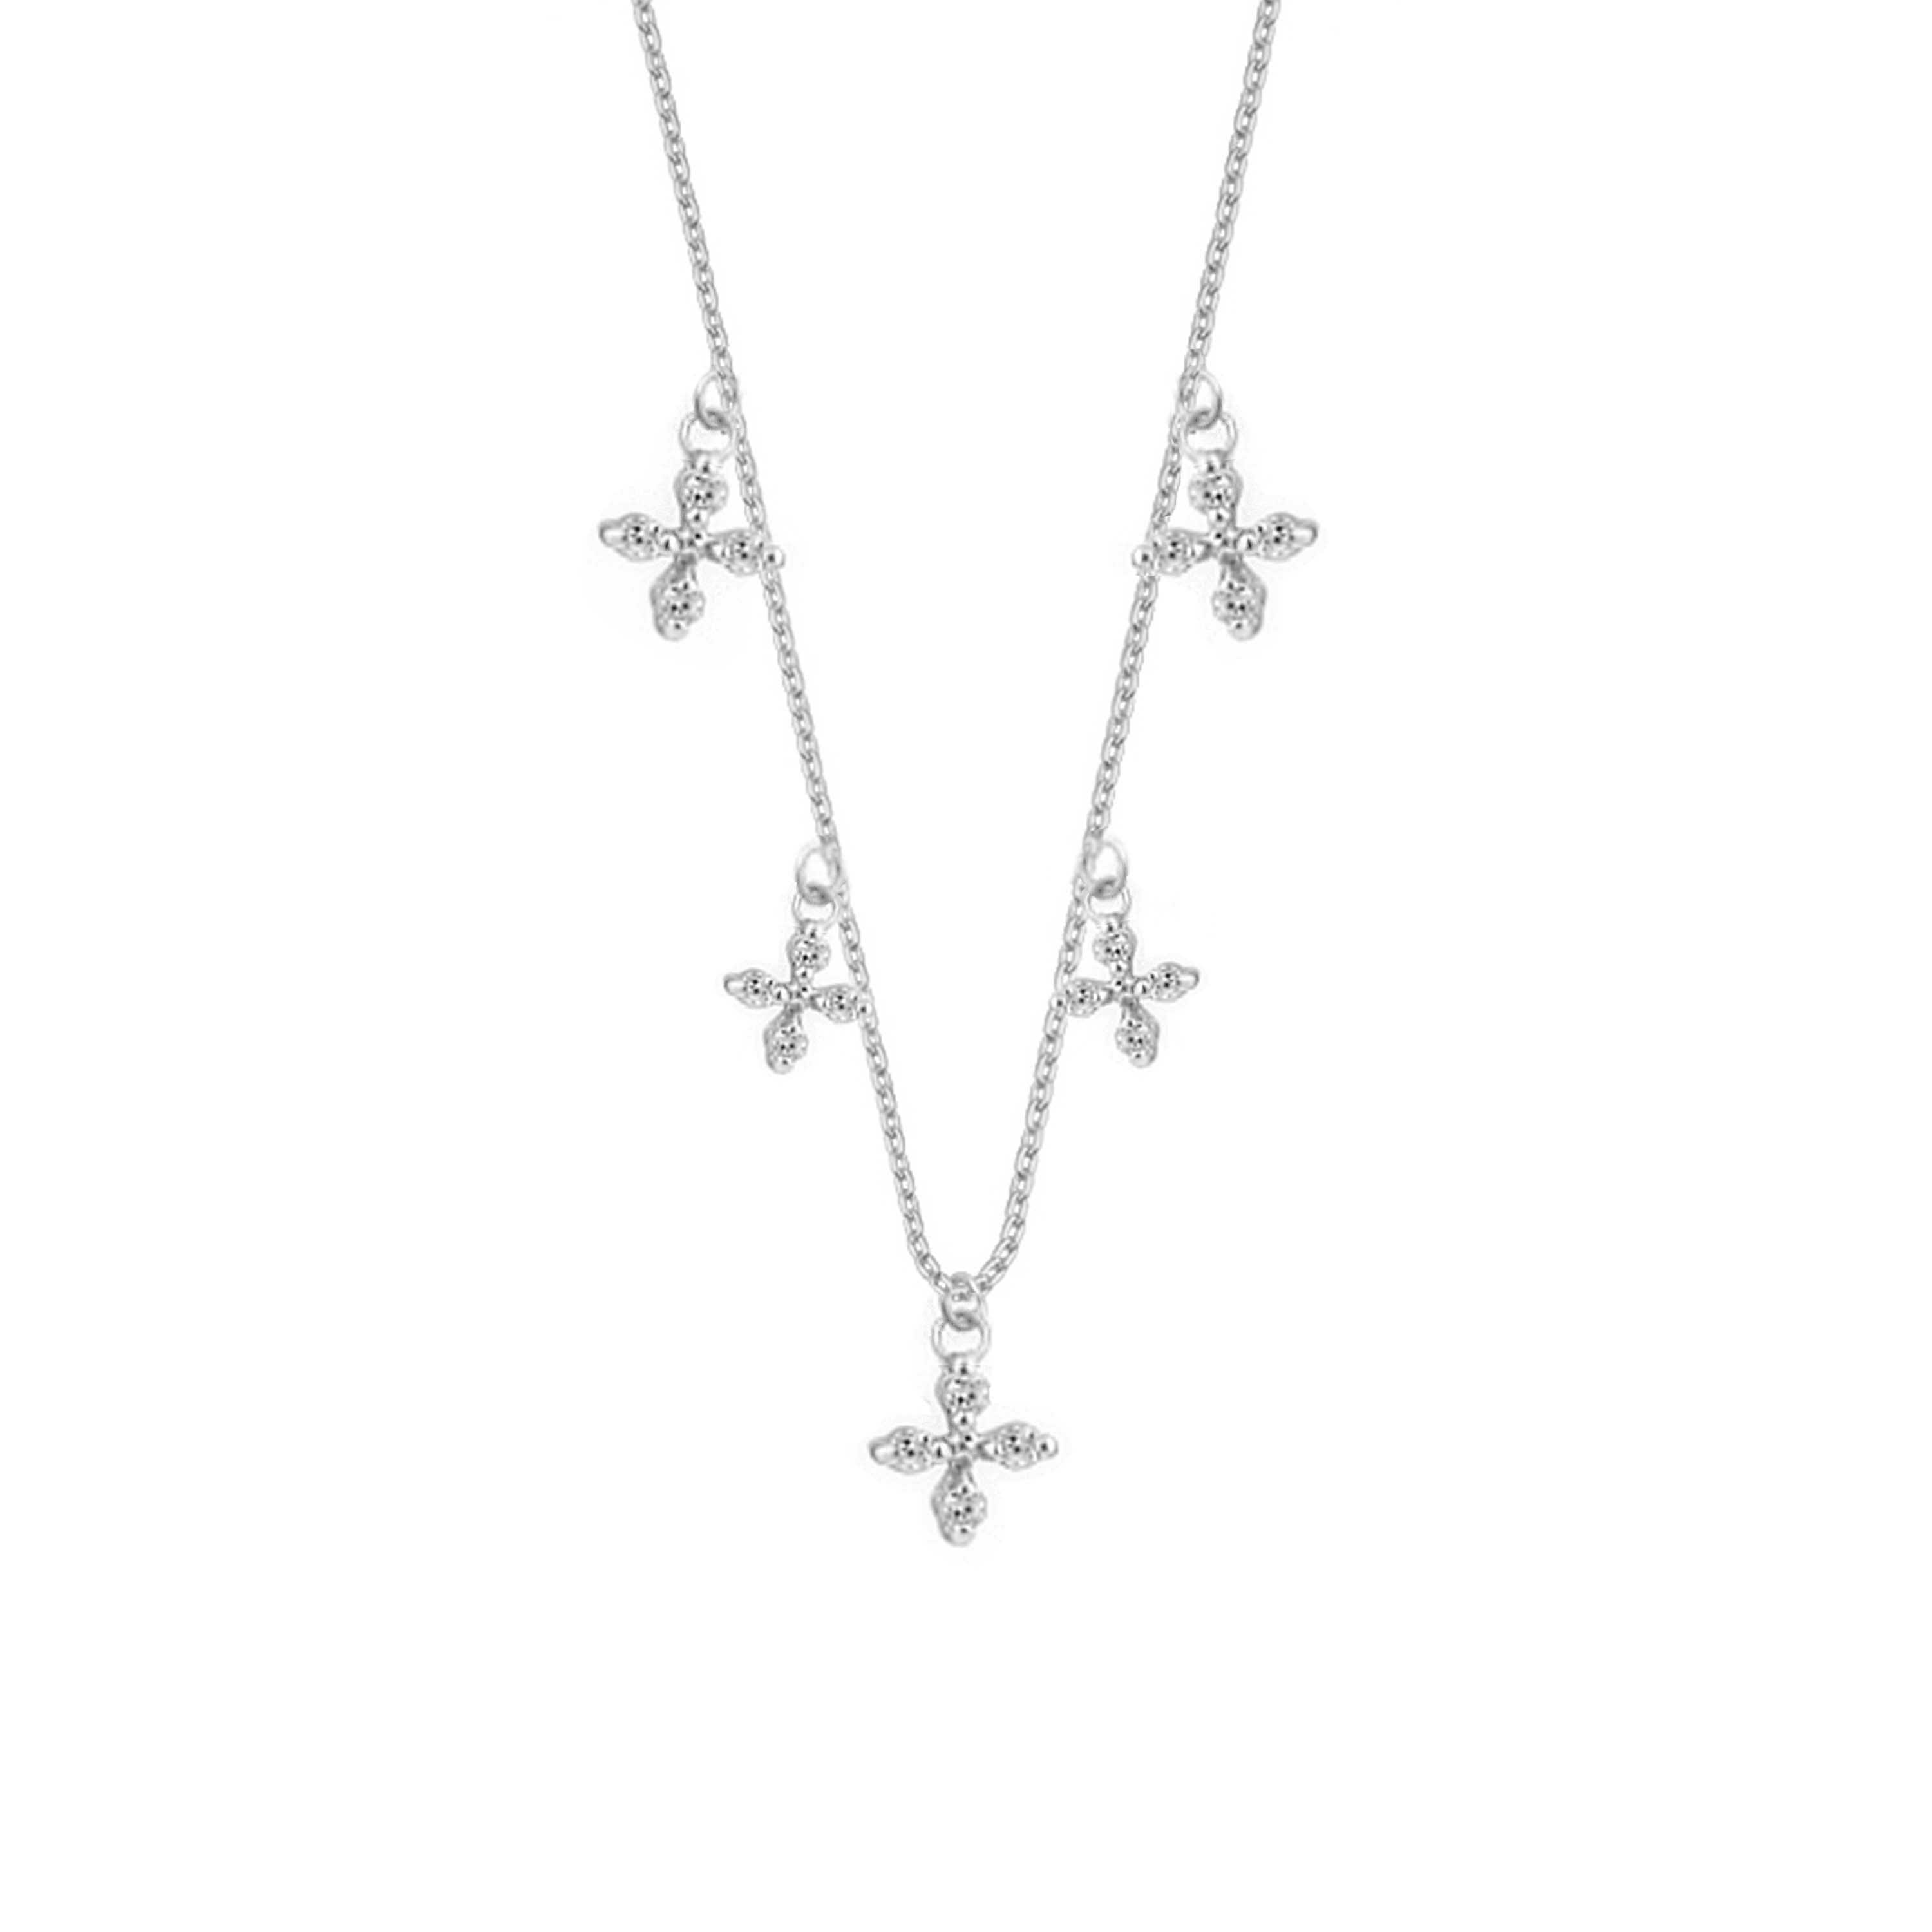 Aries Necklace - Silver